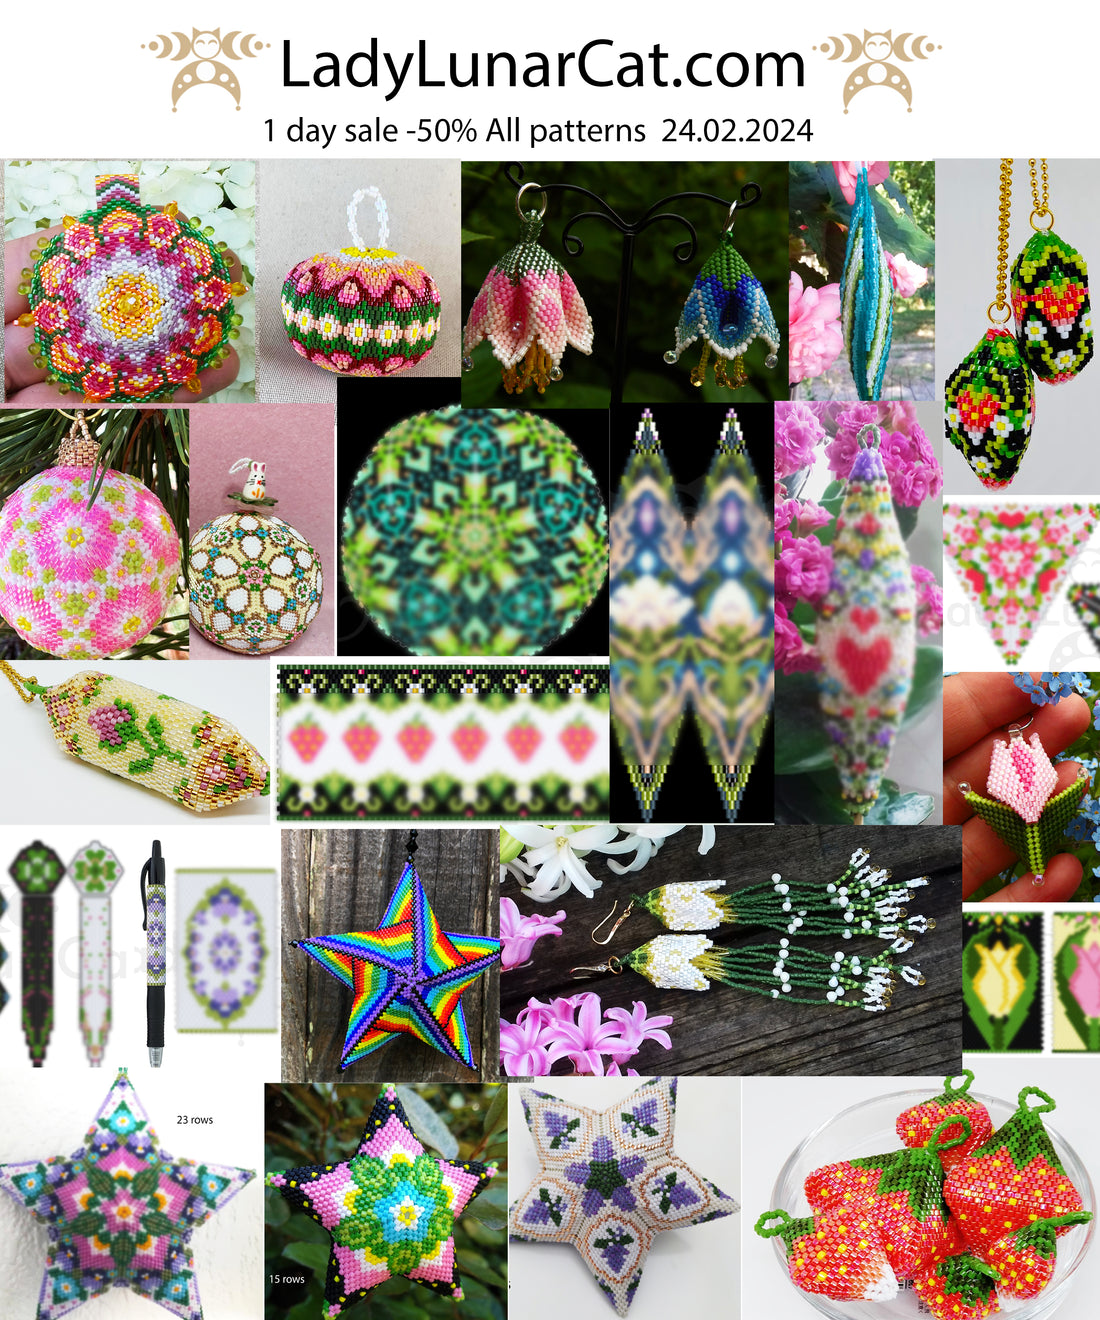 1 day sale -50% All patterns  24.02.2023 discount will be visible in the shopping cart LadyLunarCat